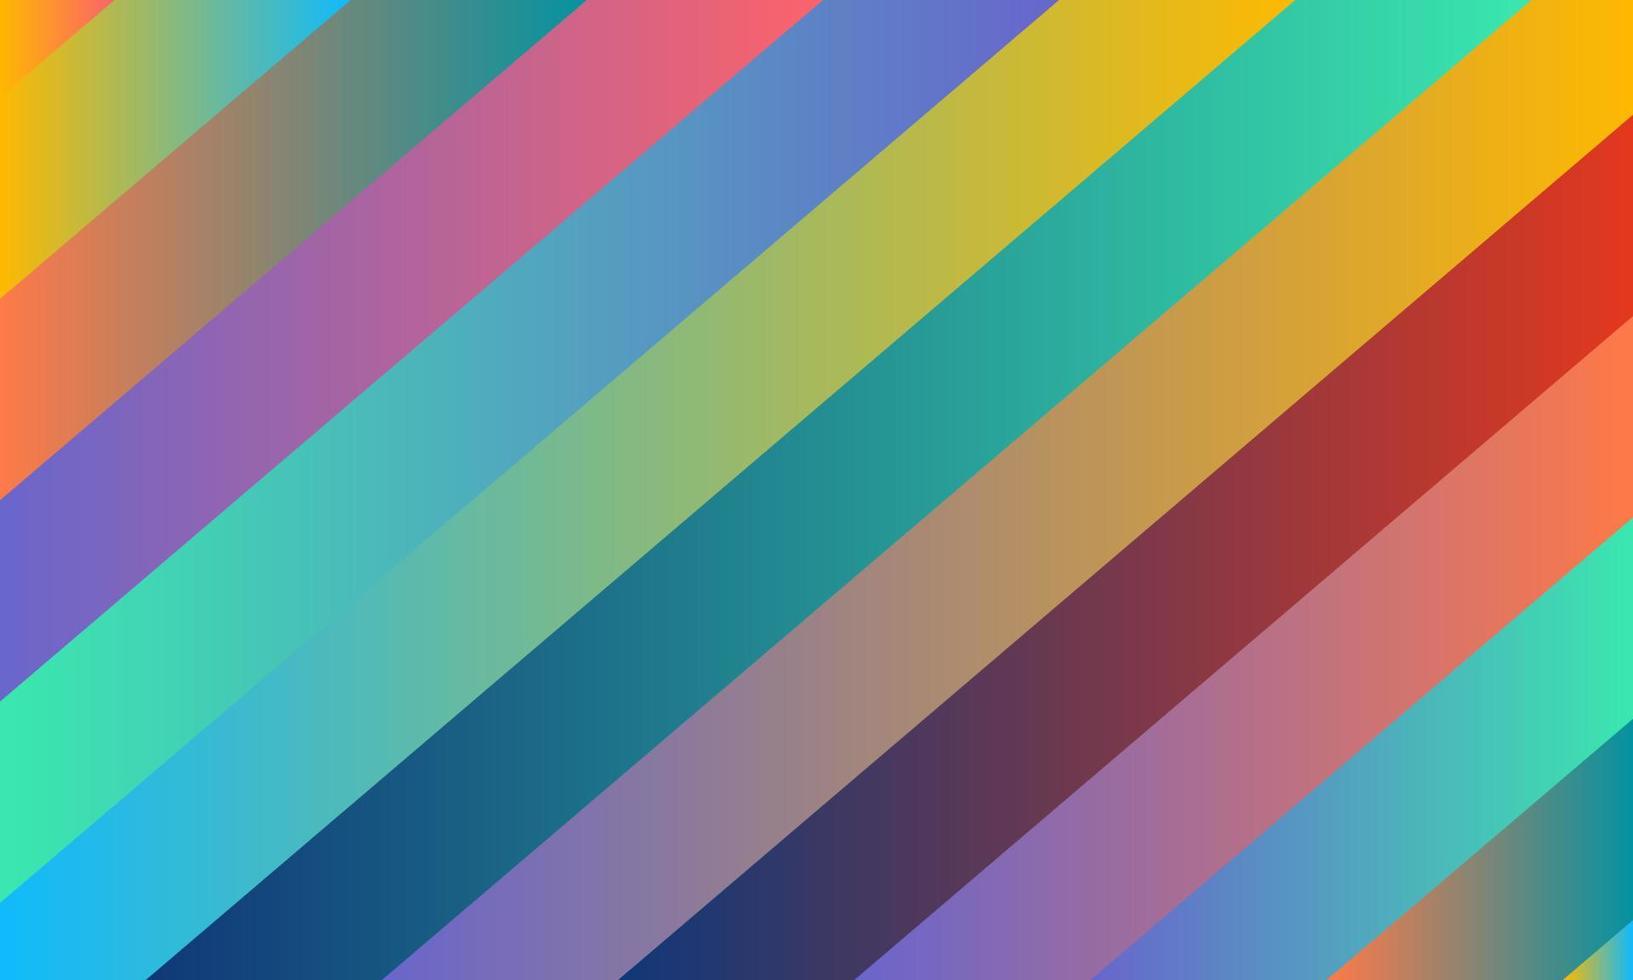 Colorful slashes with gradient pattern background. vector